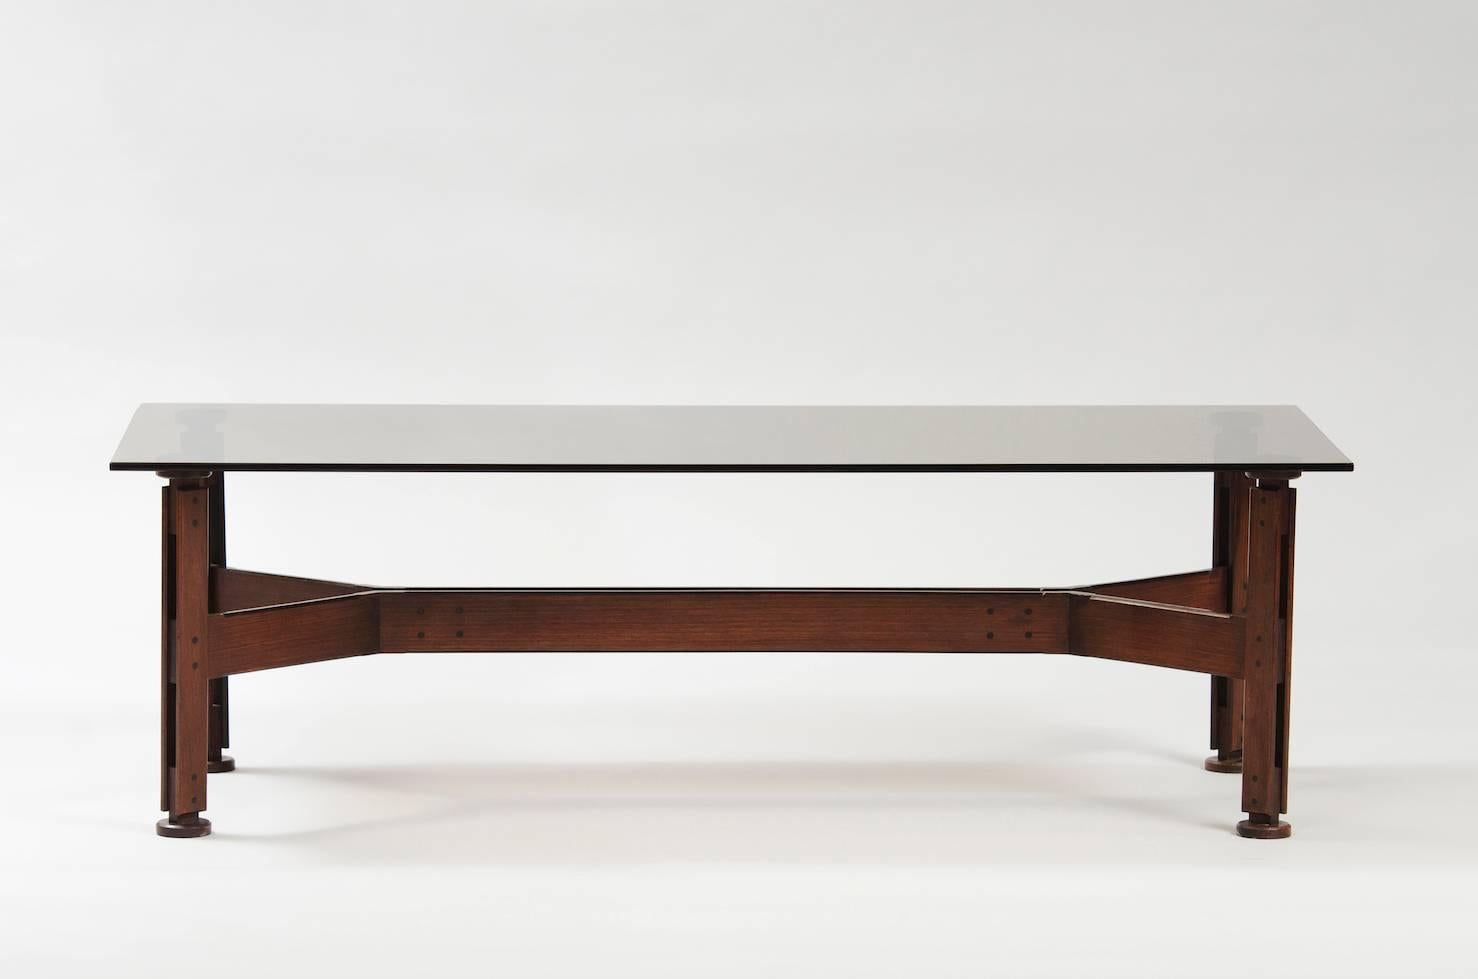 Rosewood and smoked glass top coffee table.